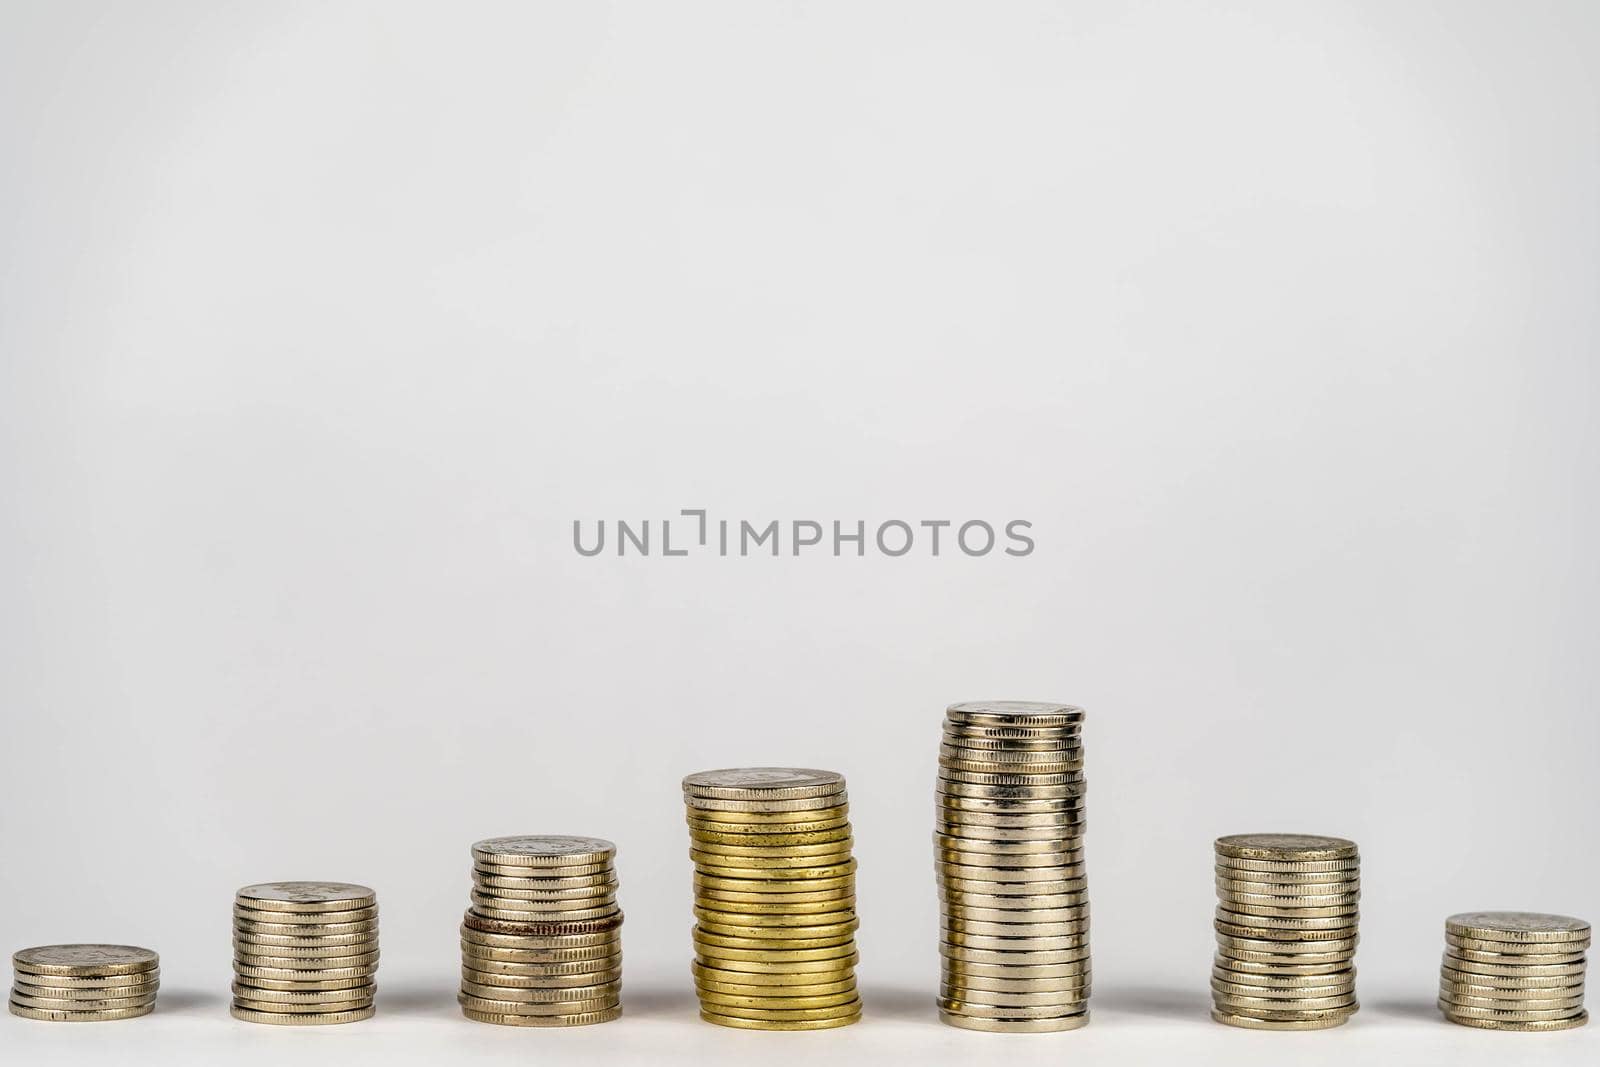 Seven stacks of golden coins with different heights arranged in growing direction, isolated on white background